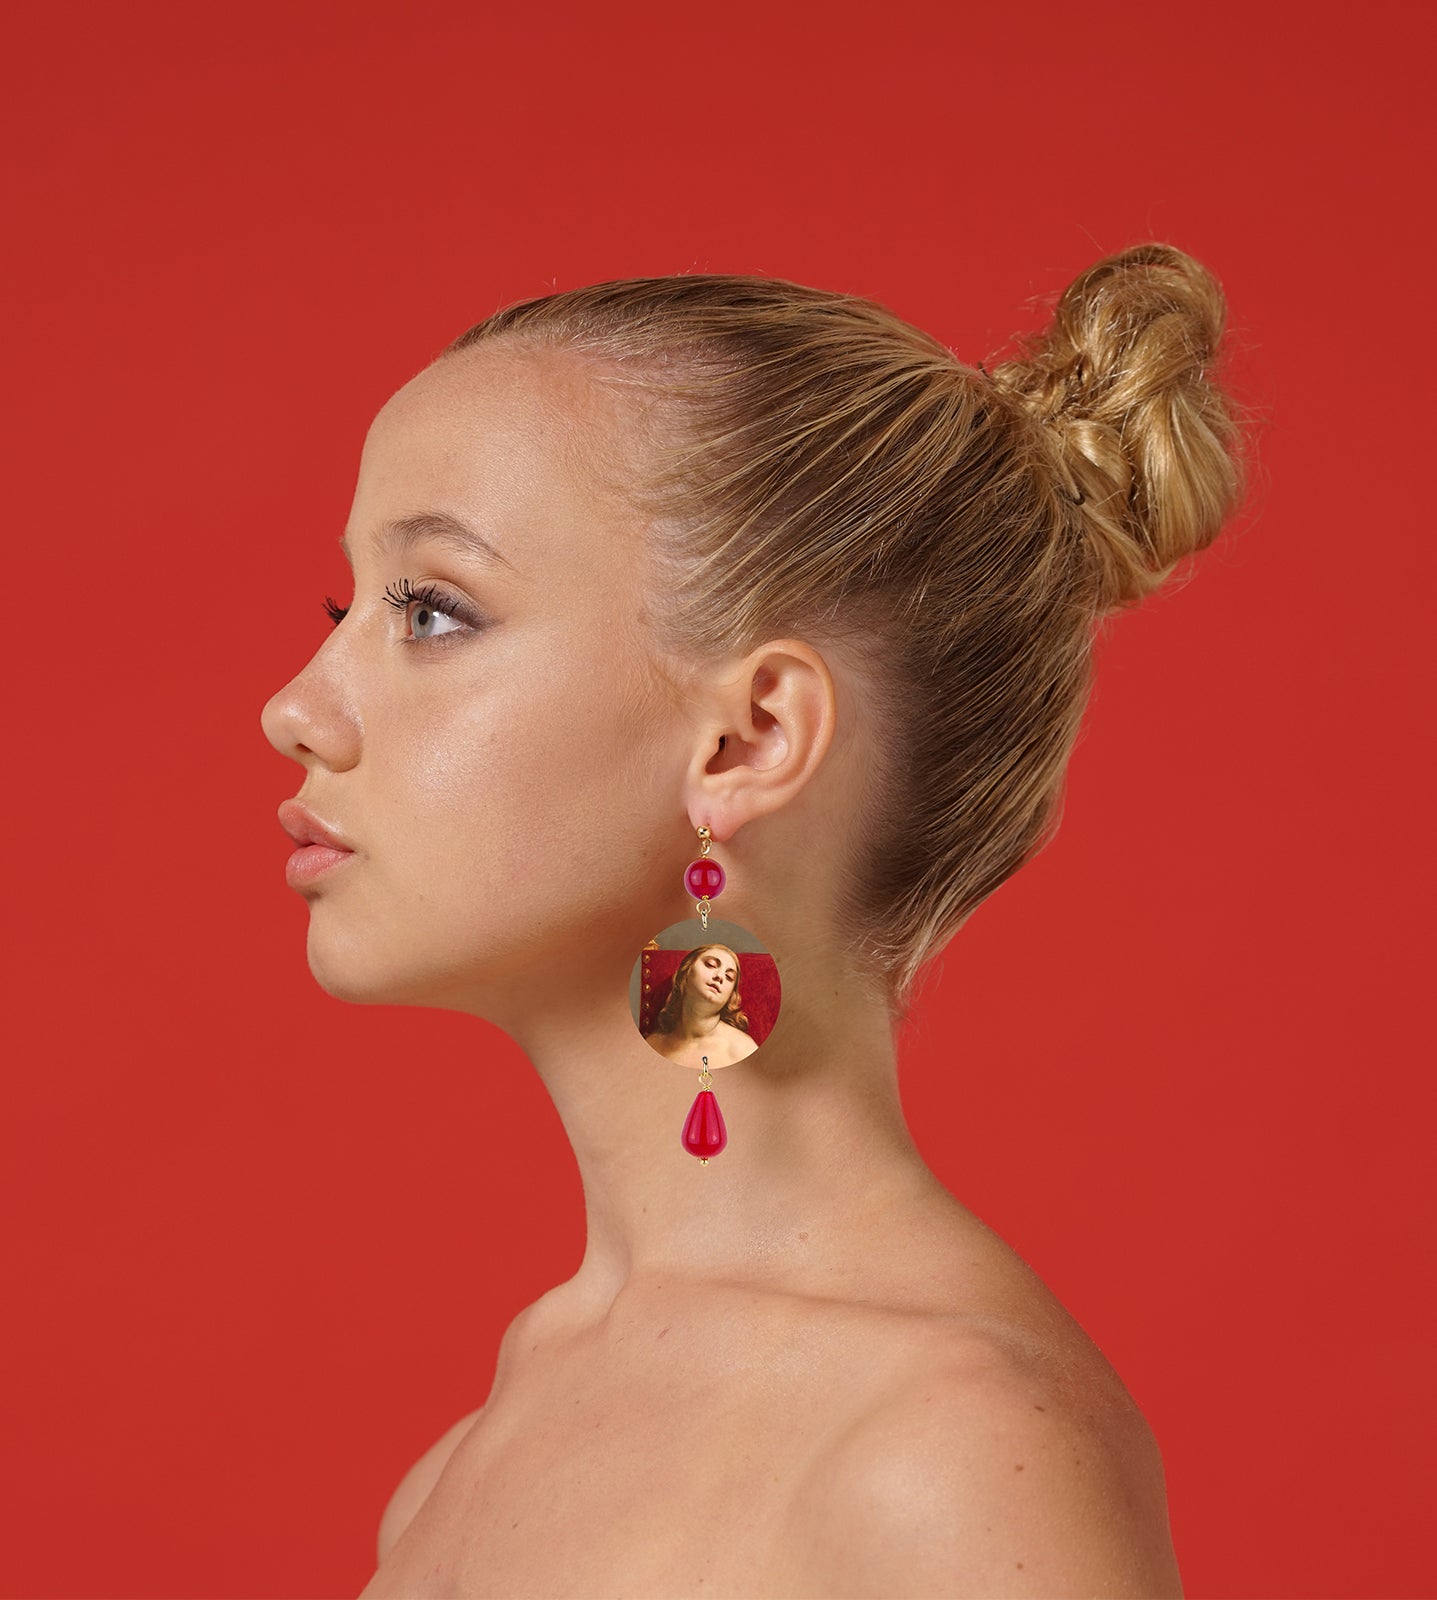 Earrings Cleopatra morente Guido Cagnacci, Limited Edition